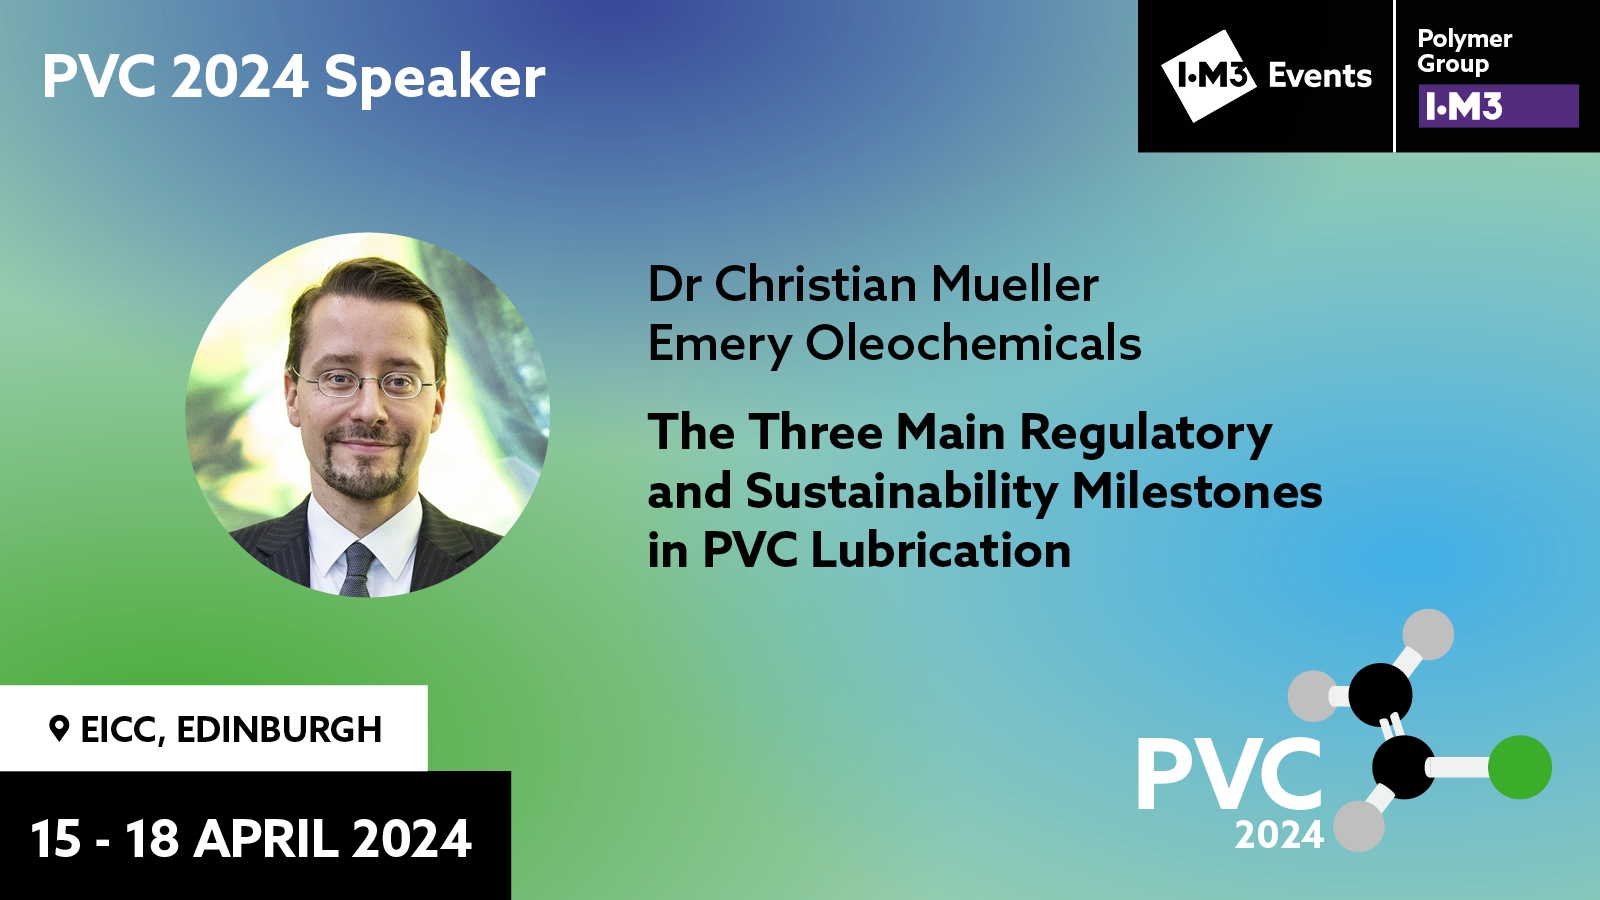 Emery Oleochemicals’ Green Polymer Additives Business to Present Review on Regulatory Aspects of PVC Lubricants at PVC 2024 Conference